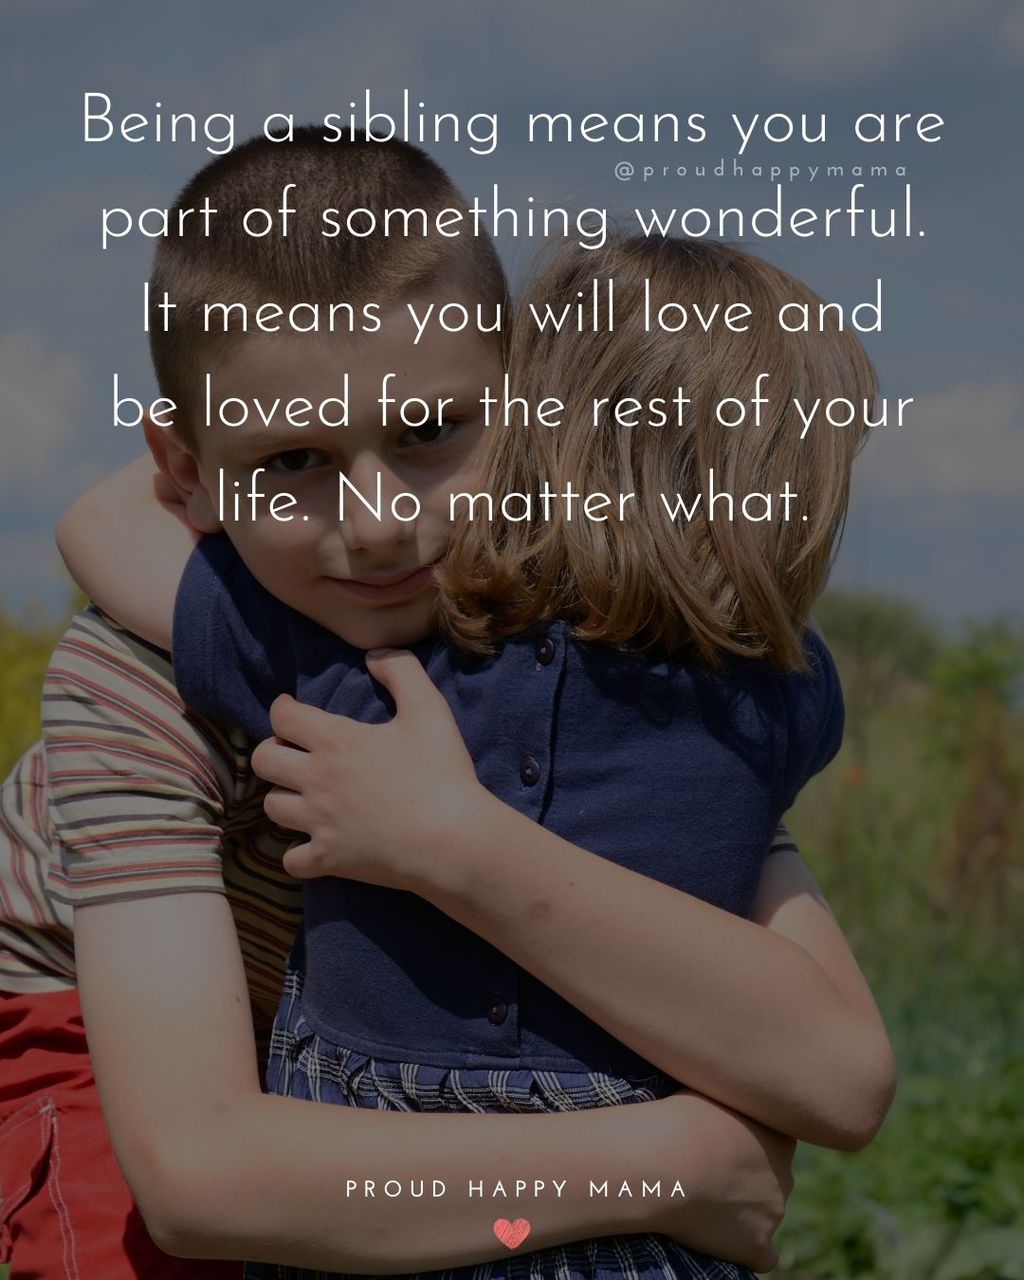 Sister Quotes - Being a sibling means you are part of something wonderful. It means you will love and be loved for the rest of your life. No matter what.